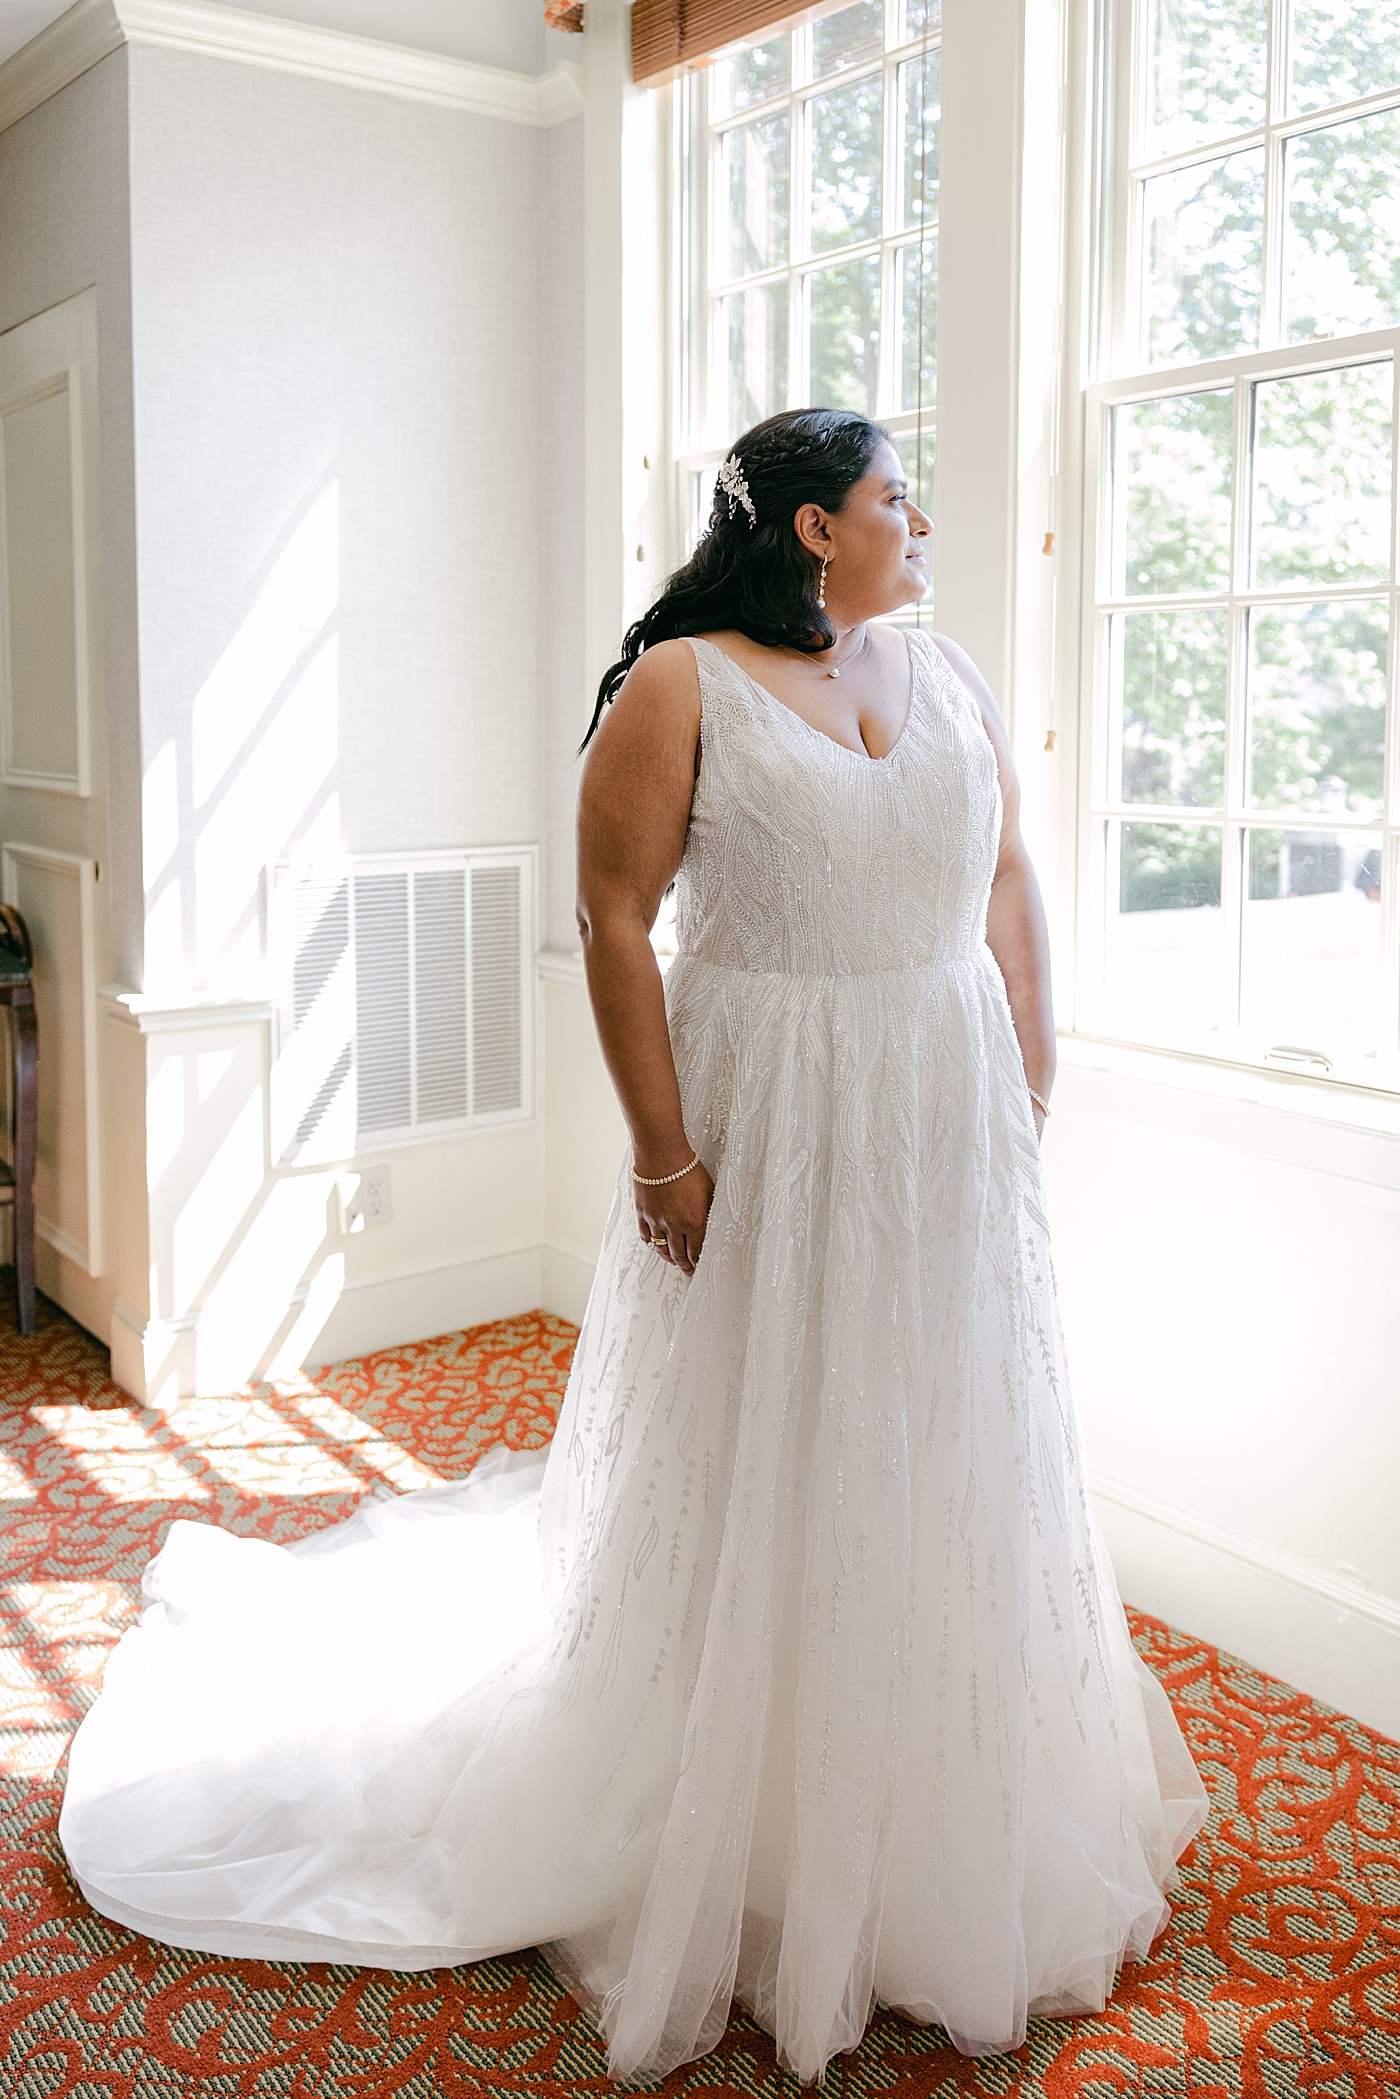 Bride in her wedding dress looking out a window on the right side of the image during Sagamore Wedding | Image by Hope Helmuth Photography